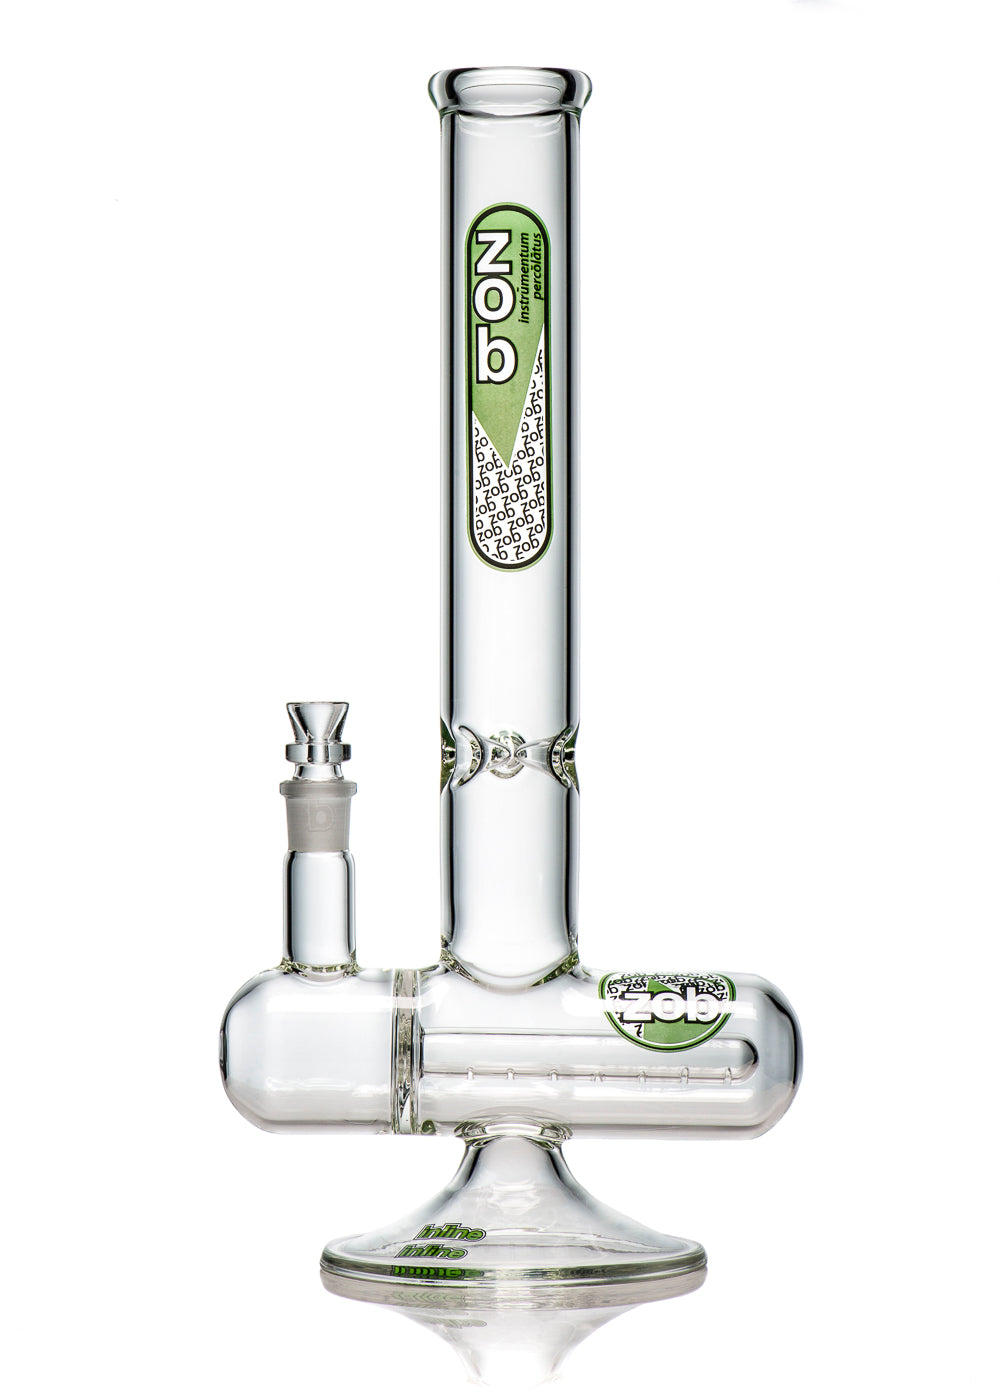 Zob 14" Inline Tube with Logo in Black and Green